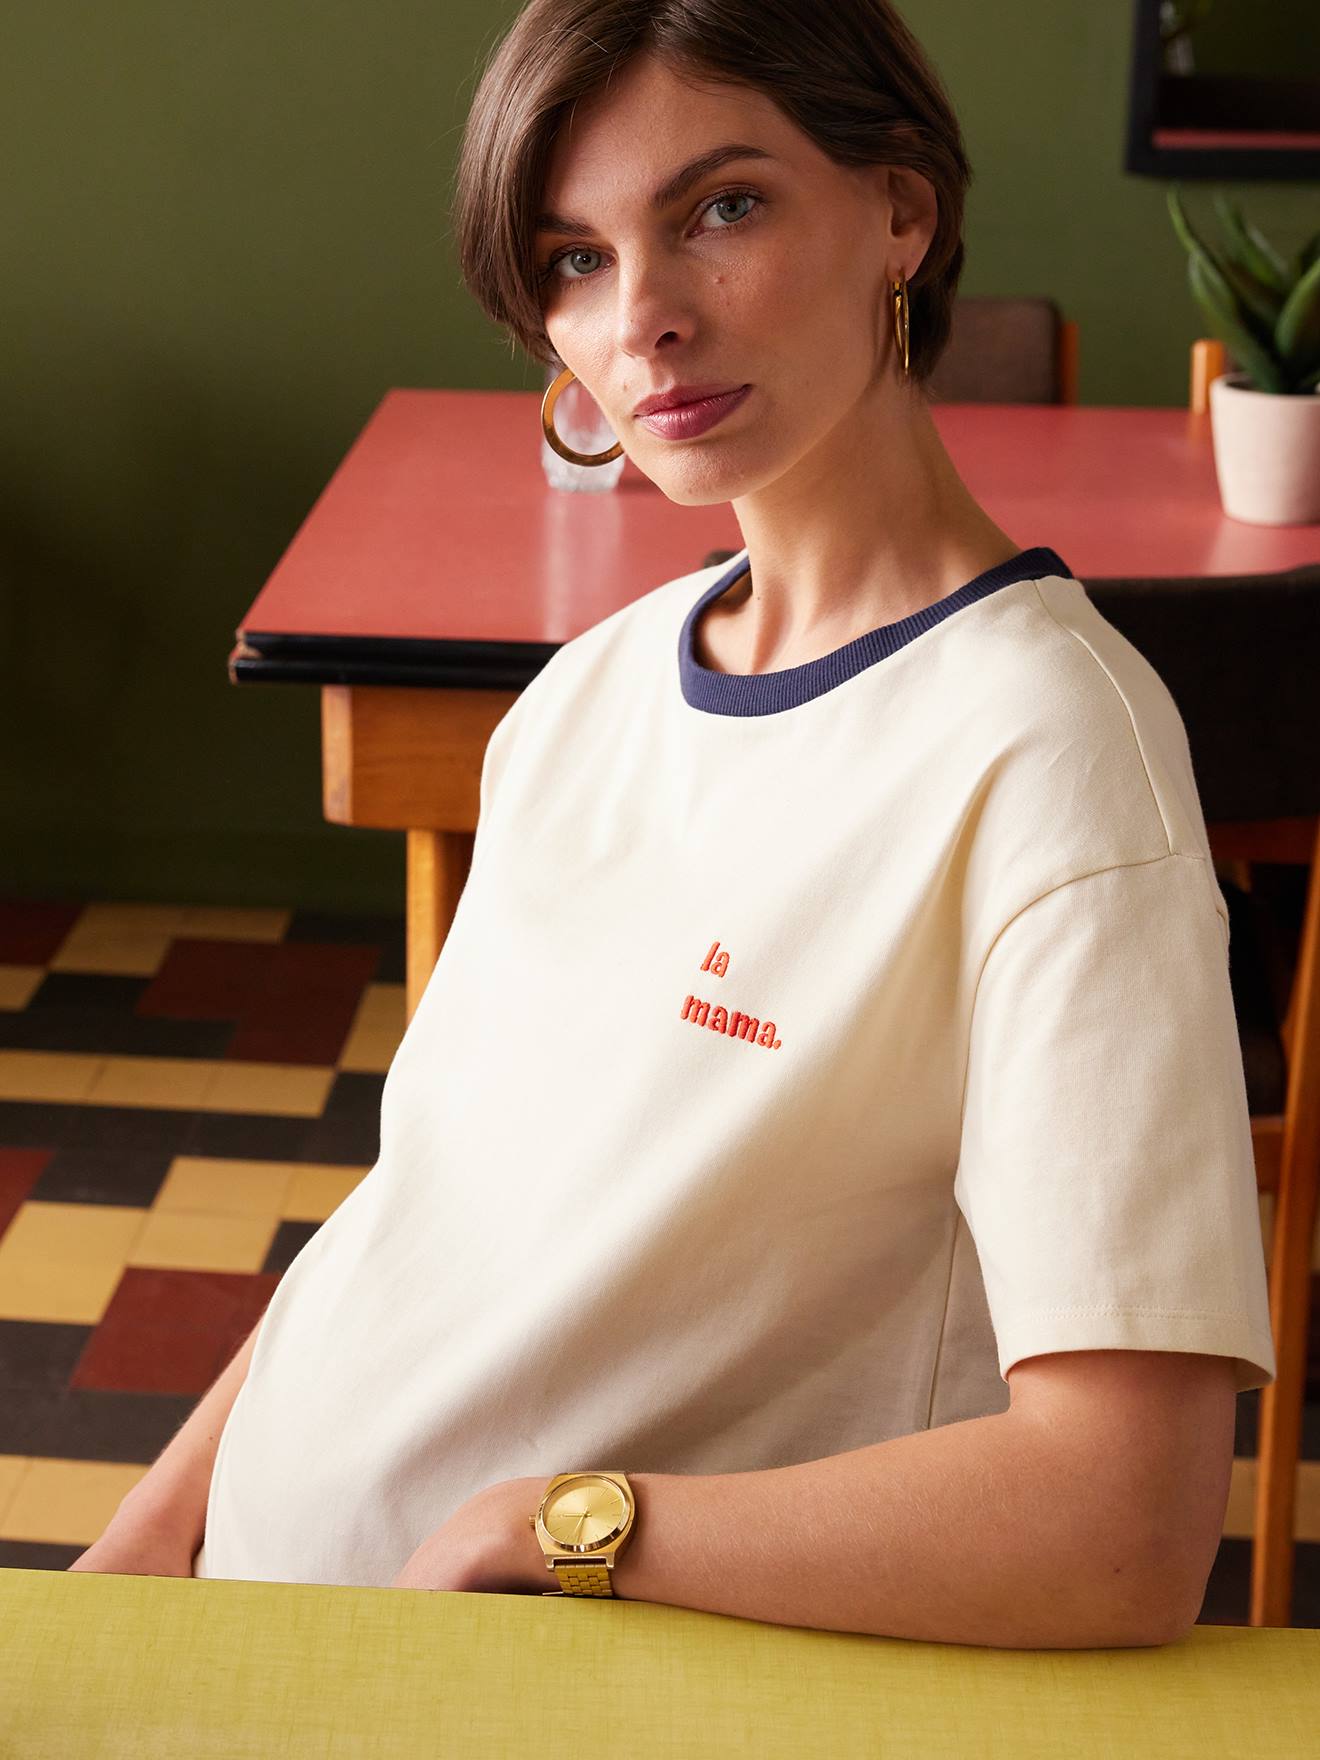 Organic Cotton T-Shirt with "la Mama" Embroidery for Maternity, by ENVIE DE FRAISE ecru